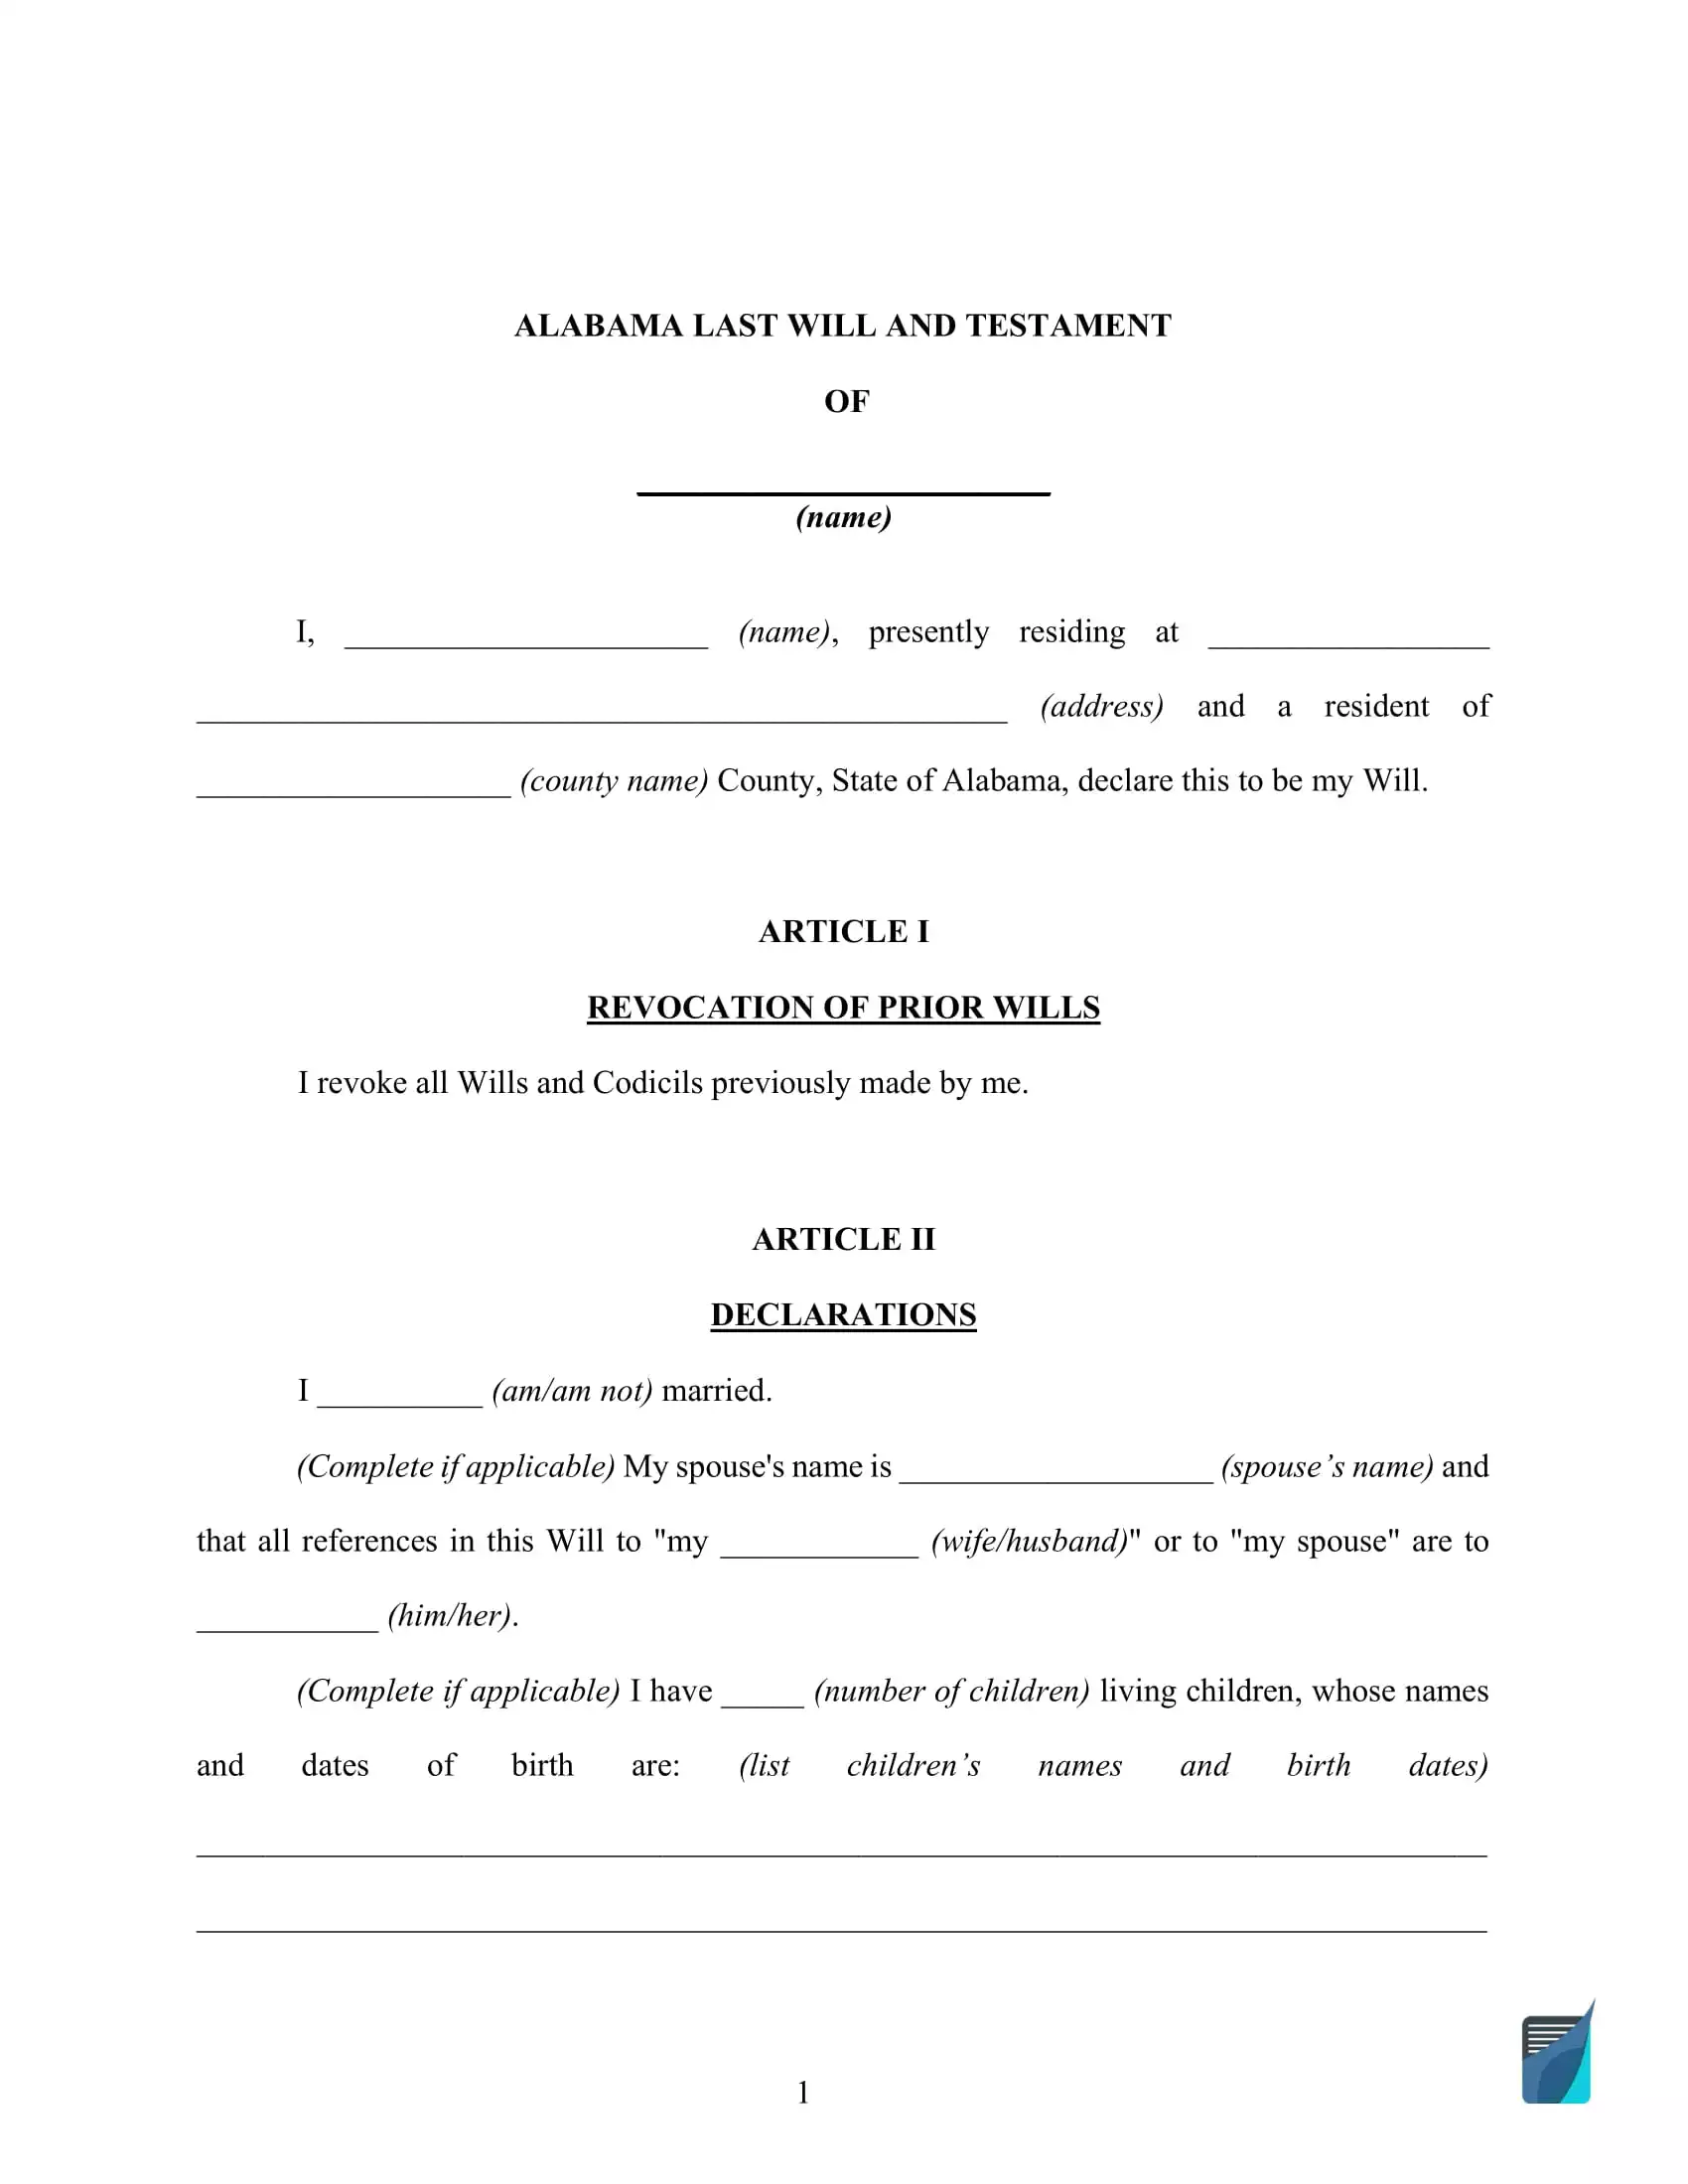 alabama-last-will-and-testament-template